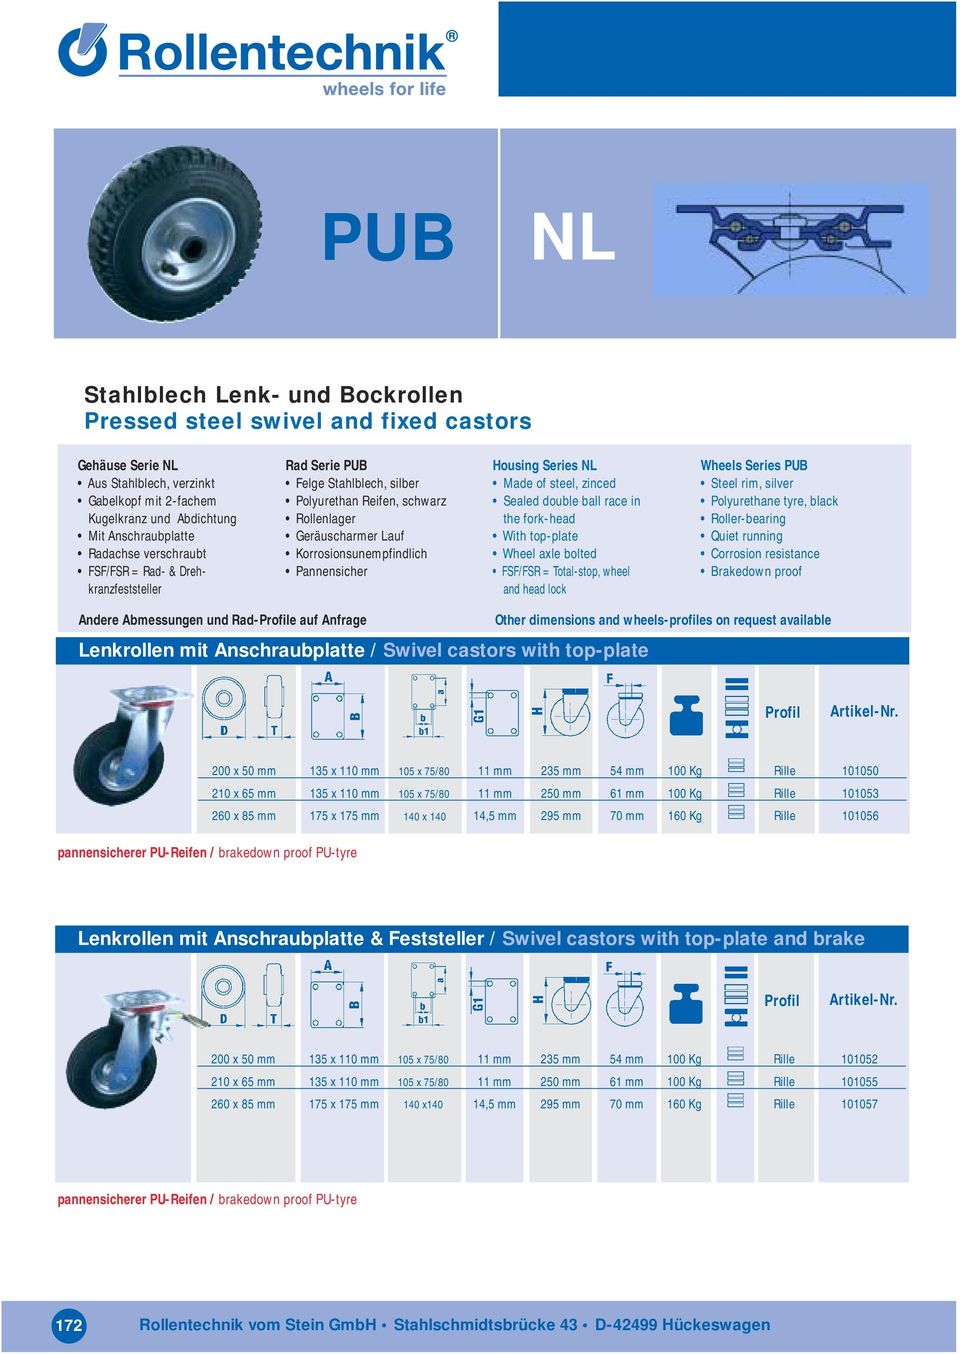 NL Made of steel, zinced Sealed double ball race in the fork-head With top-plate Wheel axle bolted FSF/FSR = Total-stop, wheel and head lock Wheels Series PUB Steel rim, silver Polyurethane tyre,